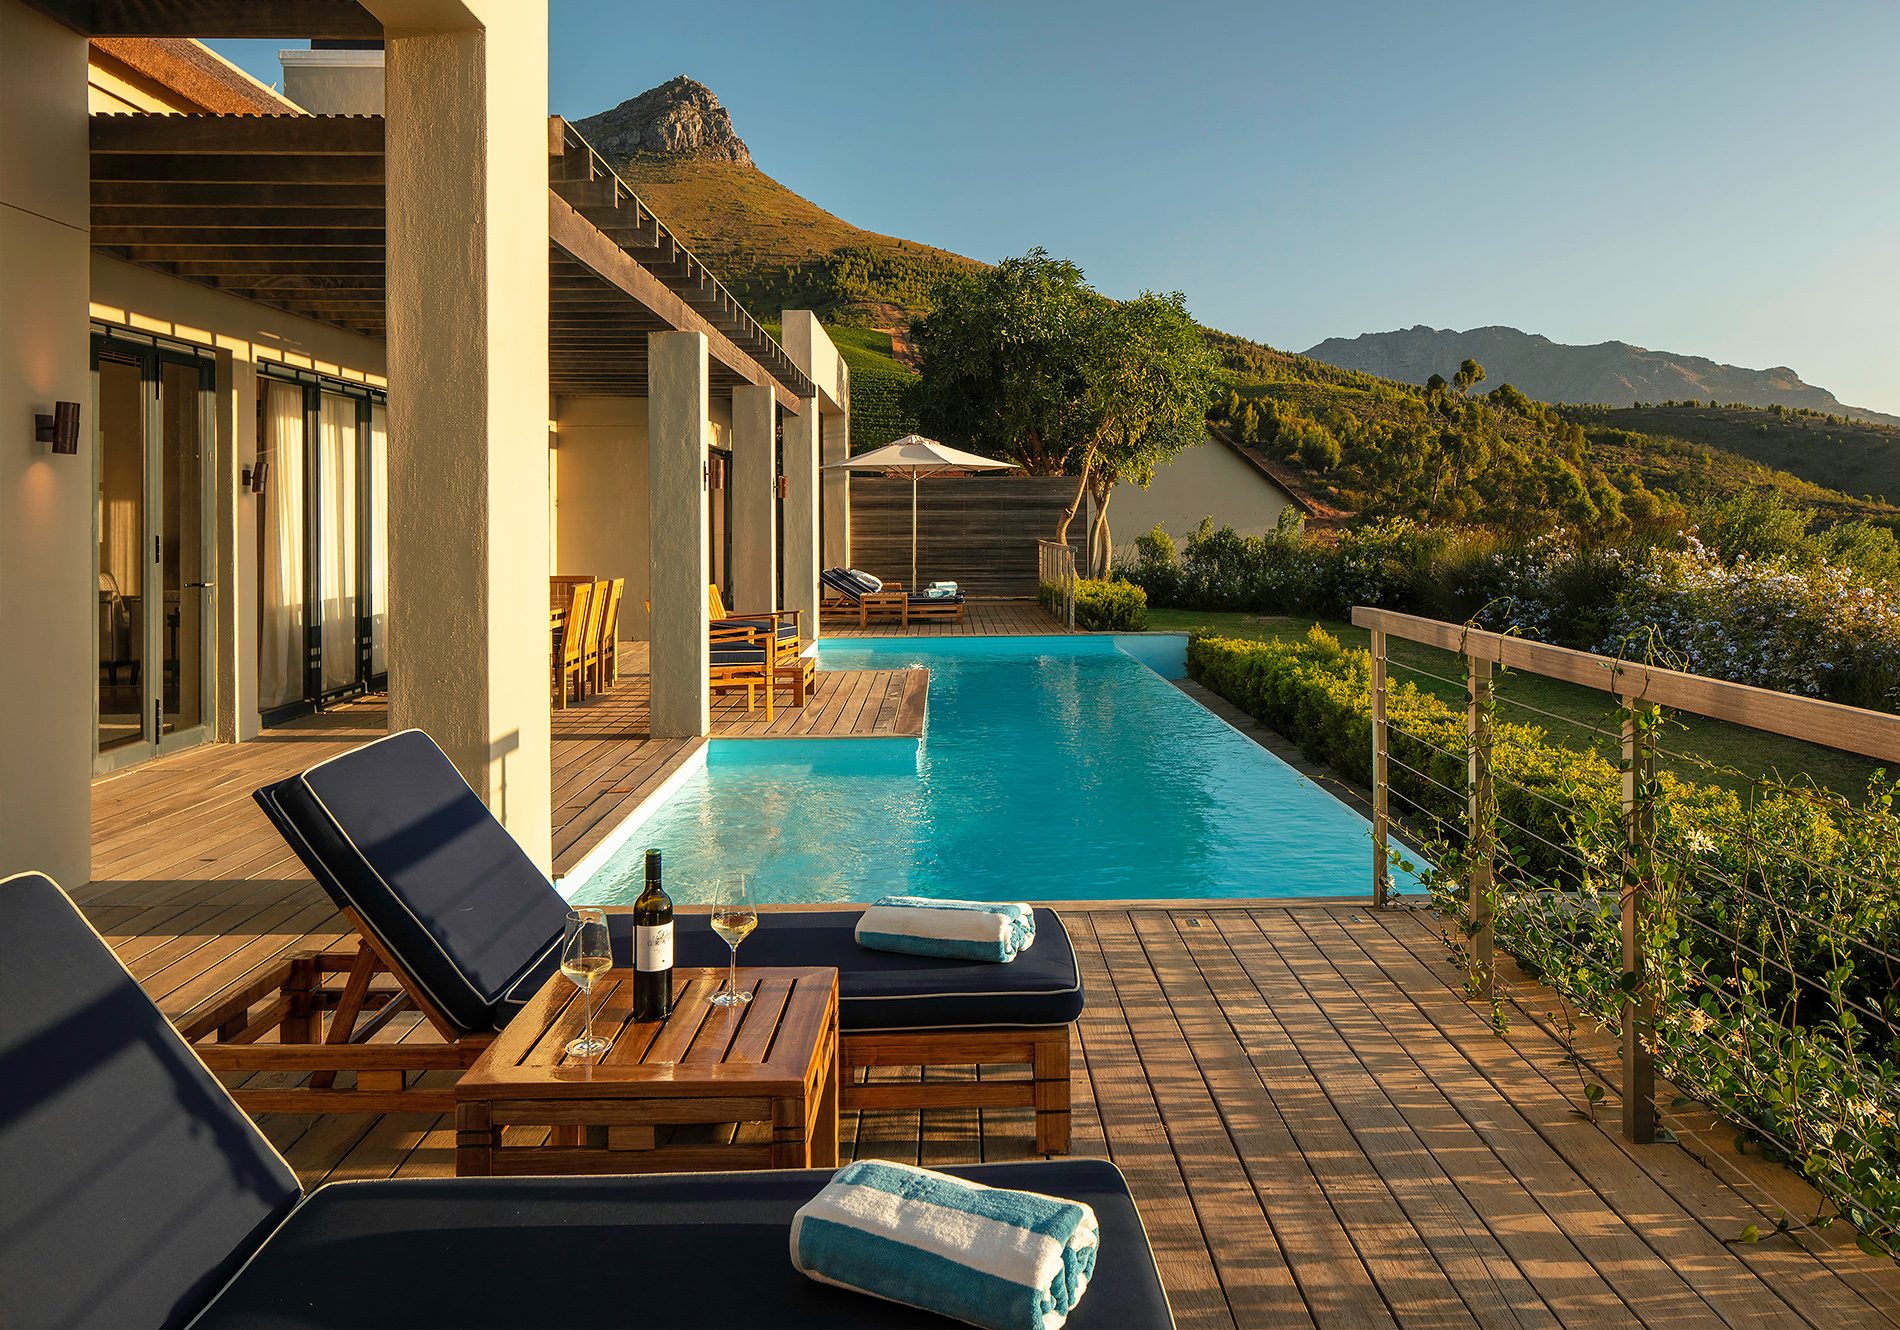 Presidential Lodge 1 12 metre private pool and terrace overlooking gardens and mountains